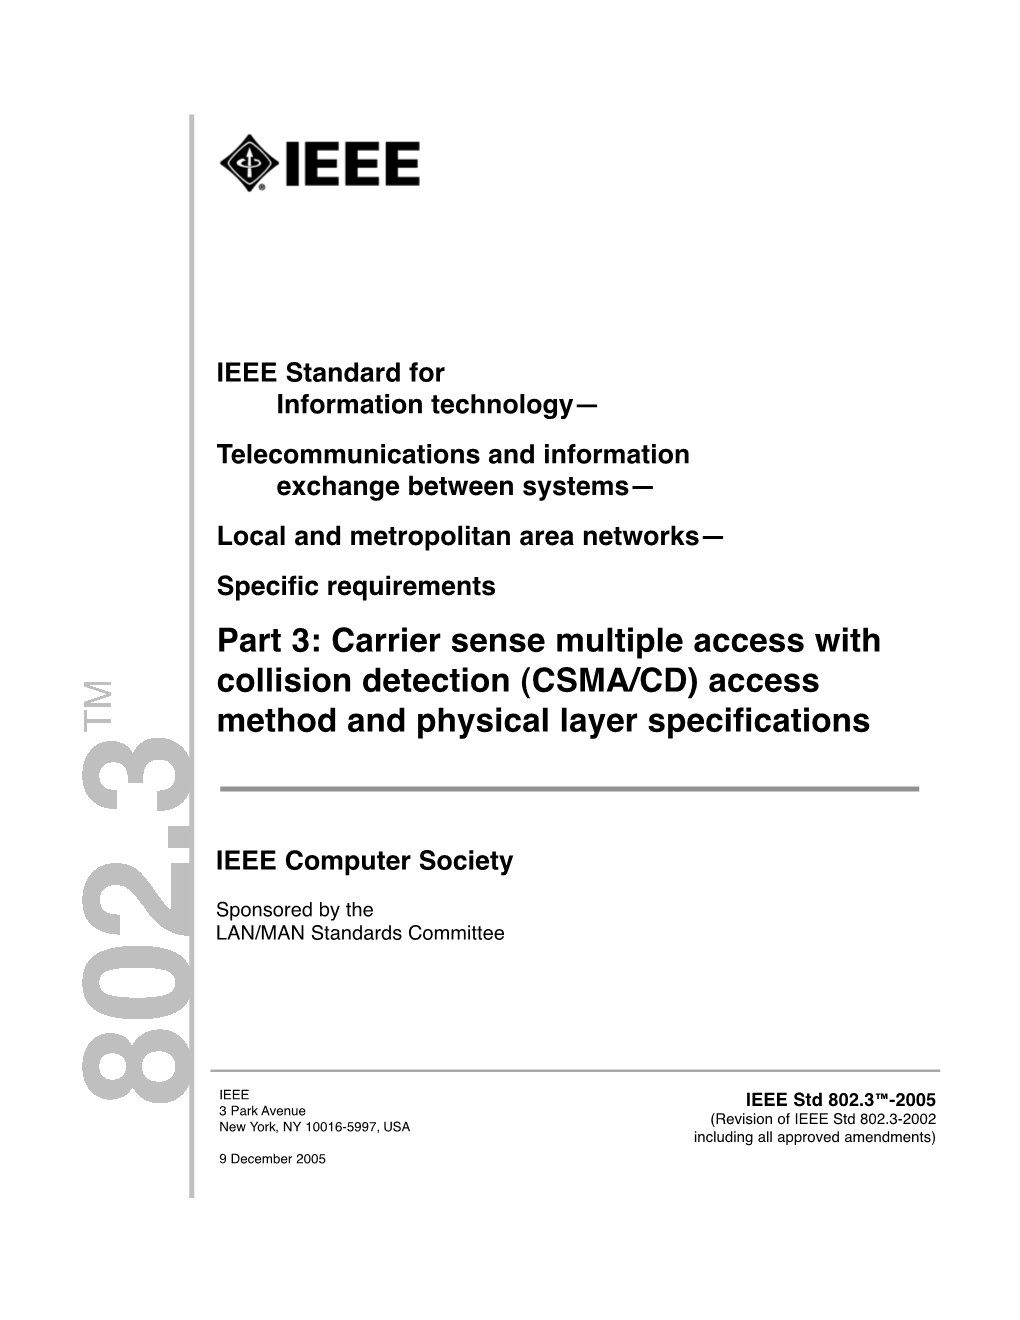 IEEE Std 802.3-2005, Section